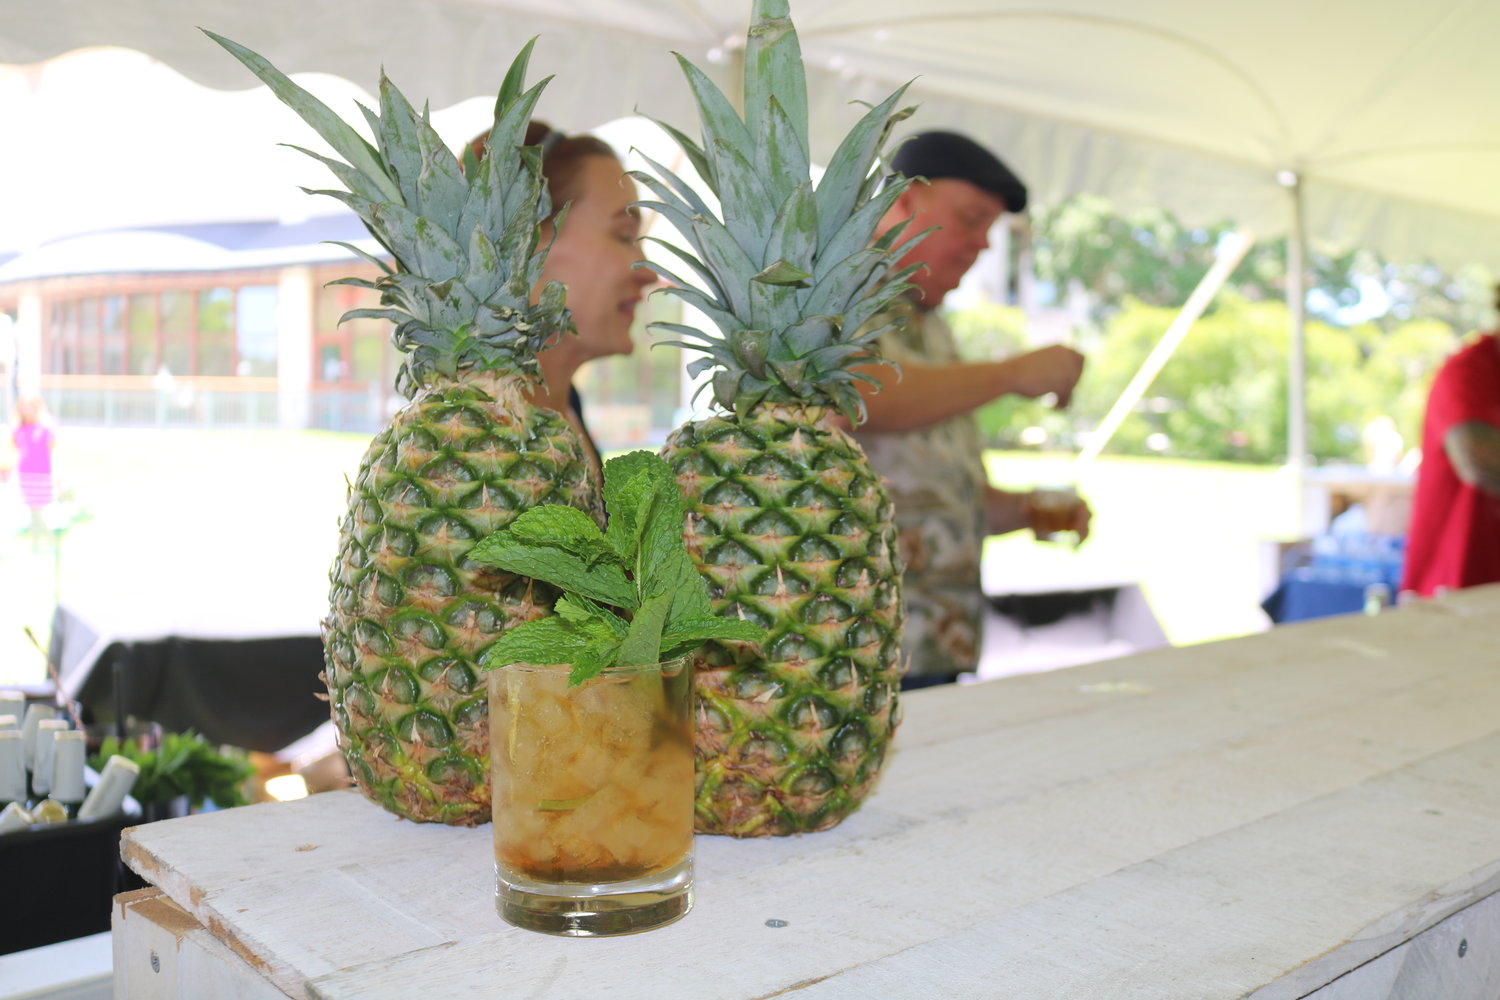 Alcoholic drinks were a staple of the St. Augustine Food & Wine Festival.